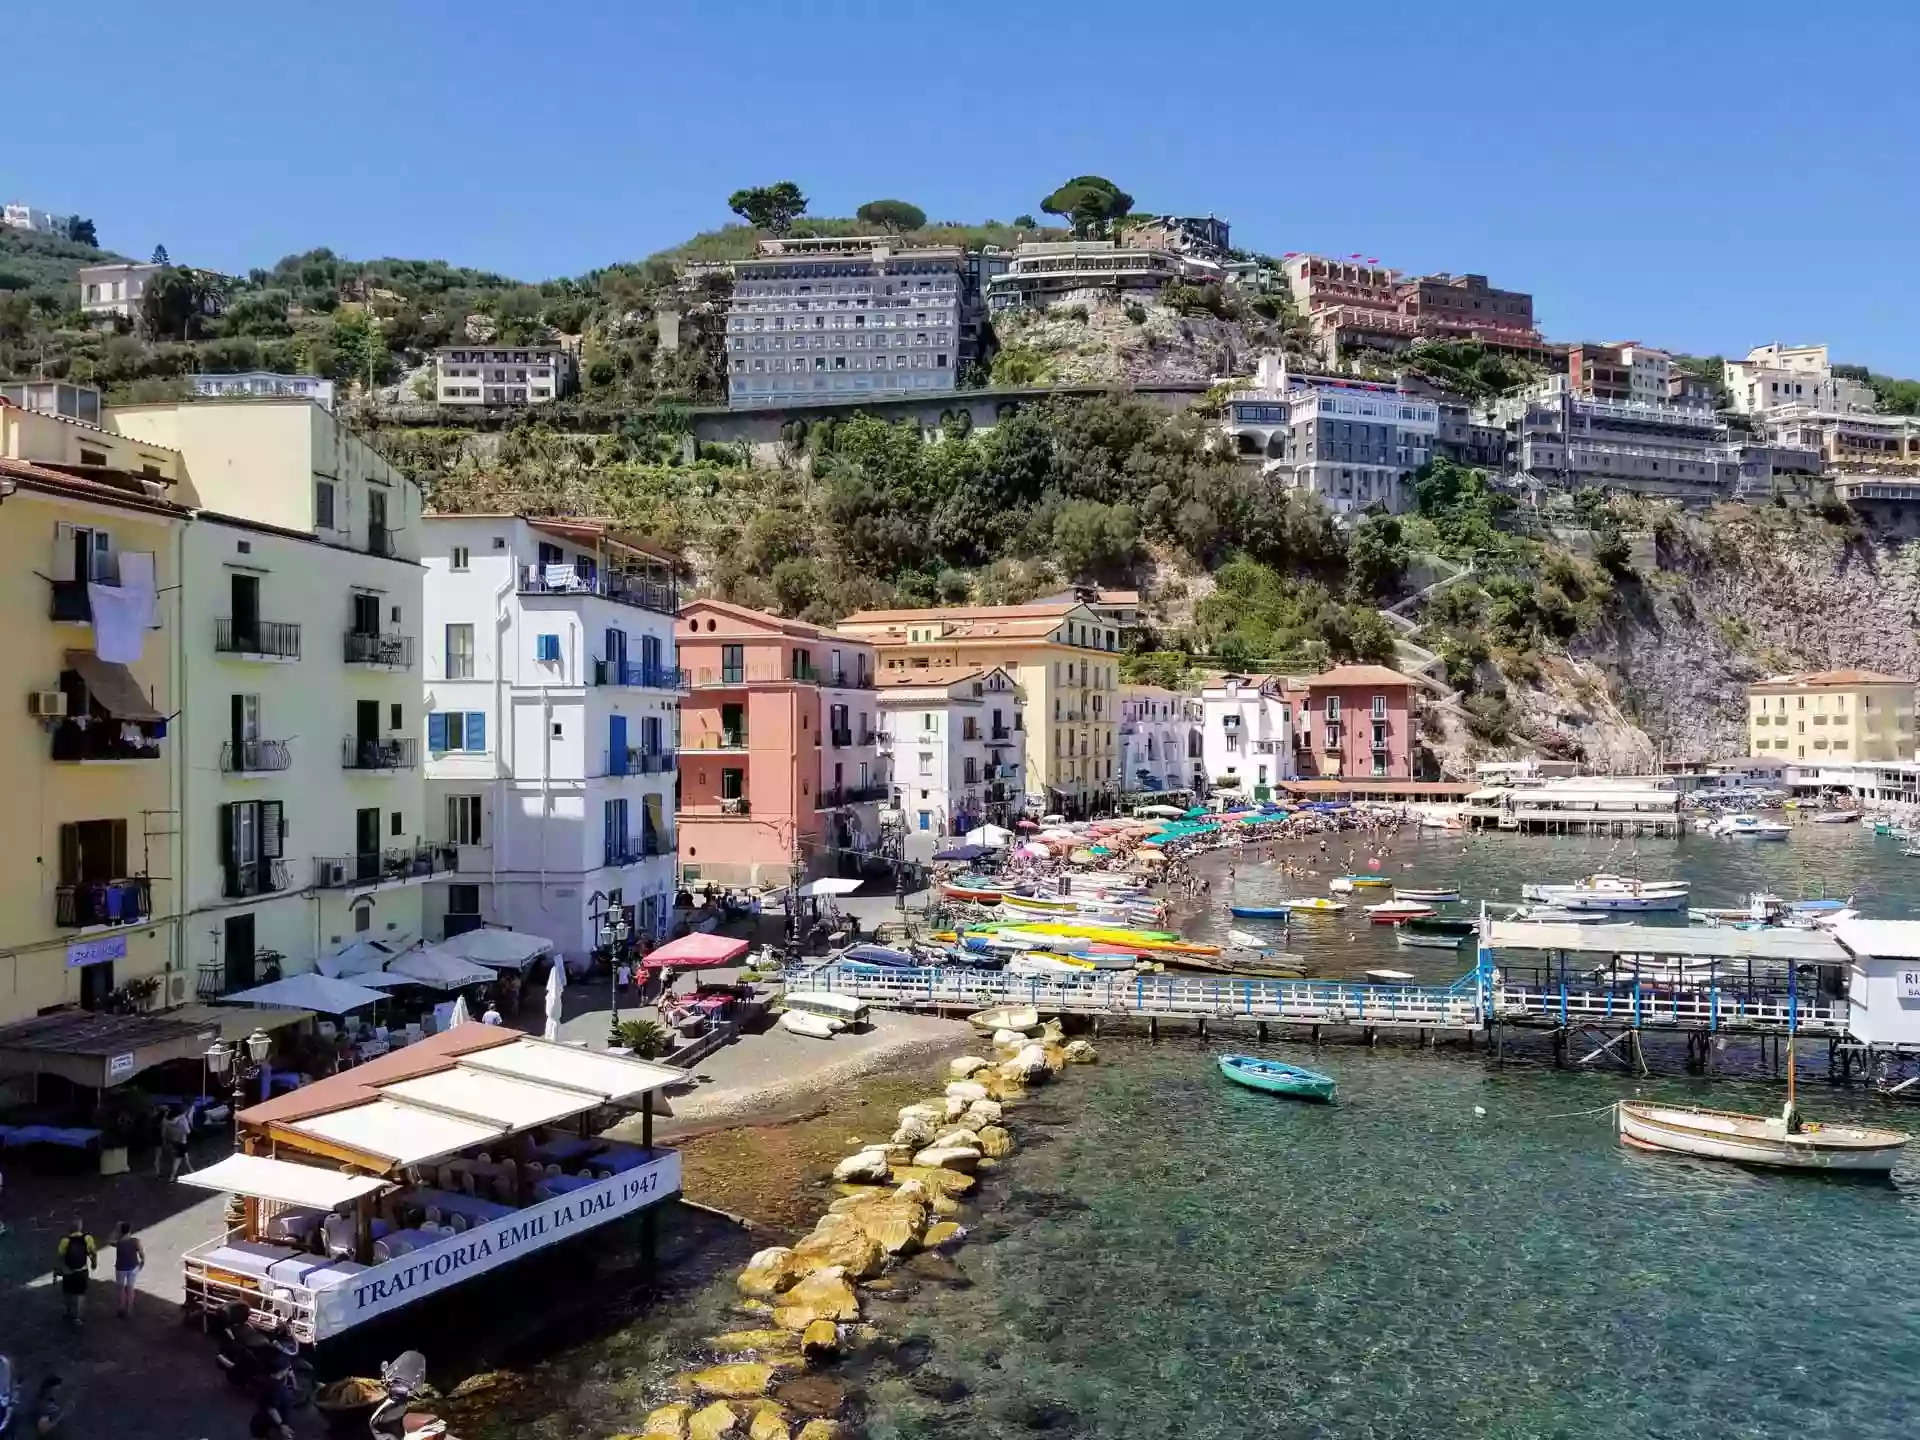 SorrentoVibes | Villas, Holiday Homes & Experiences in Italy